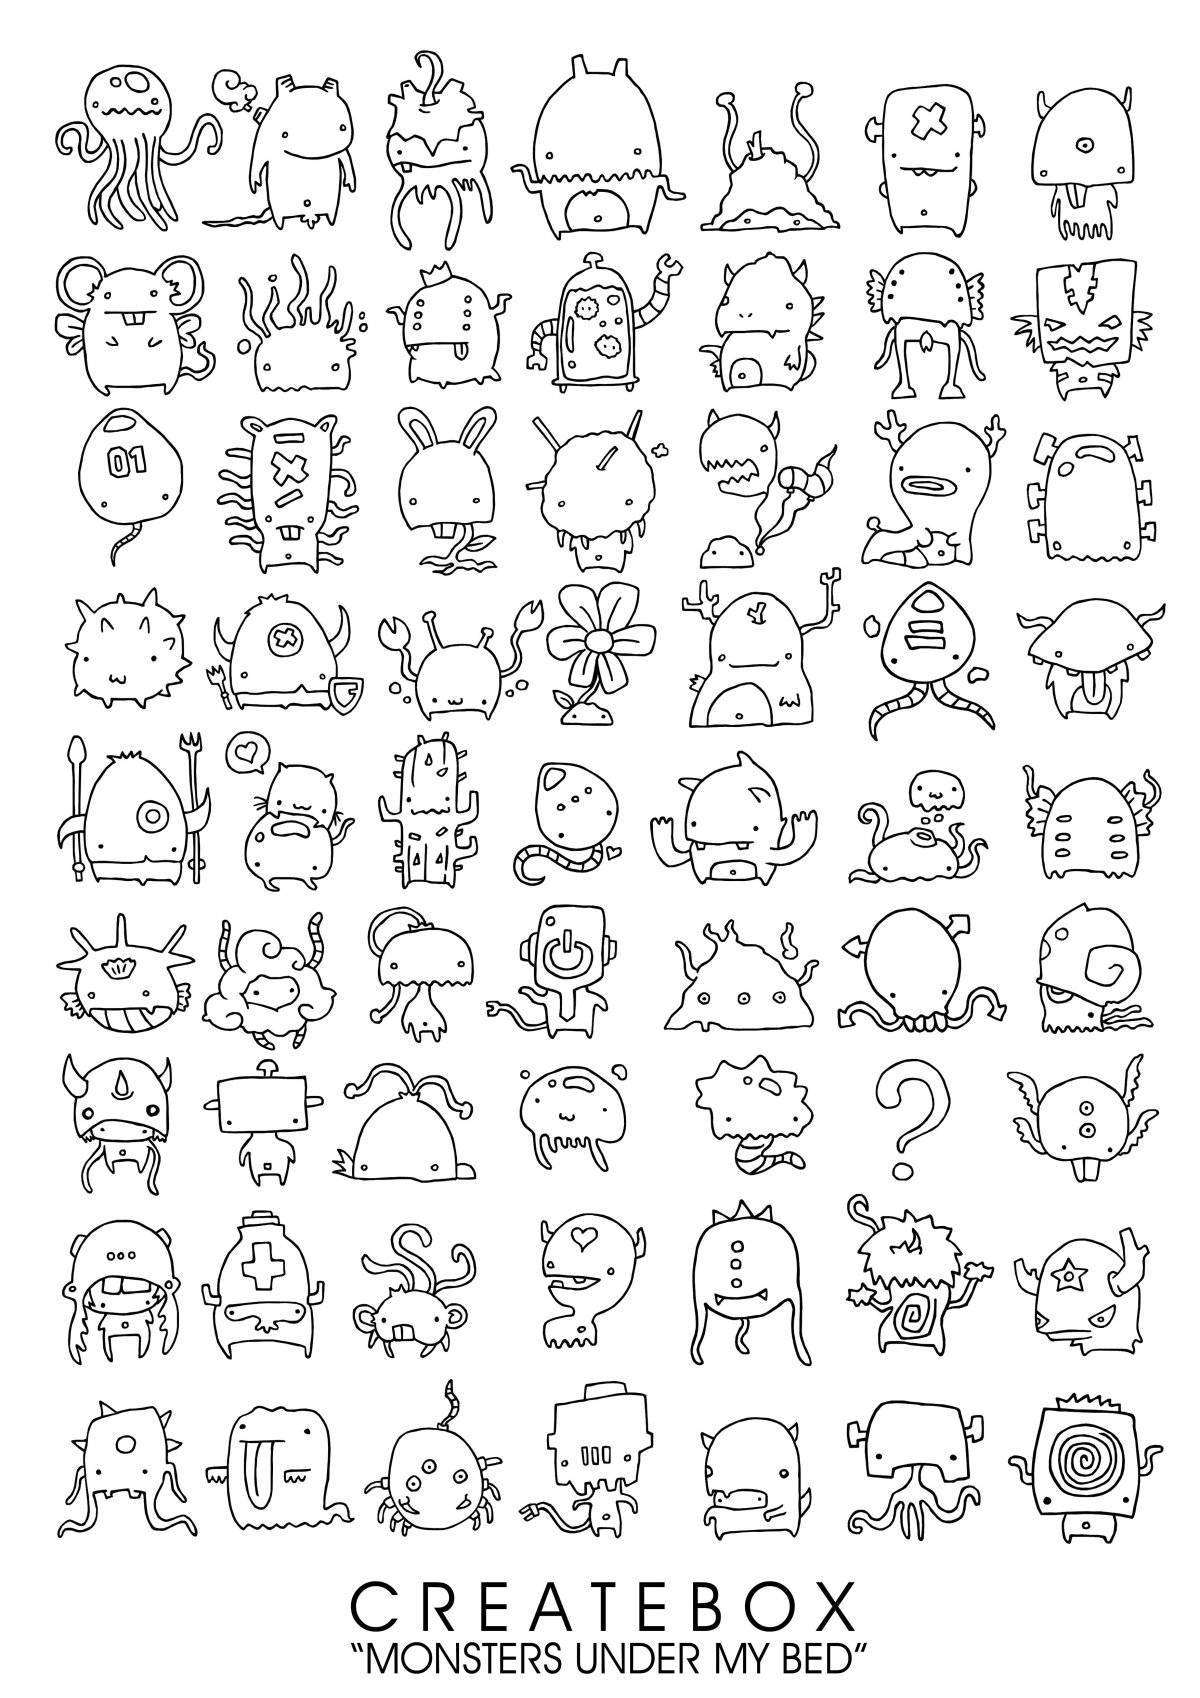 Charming coloring small stickers